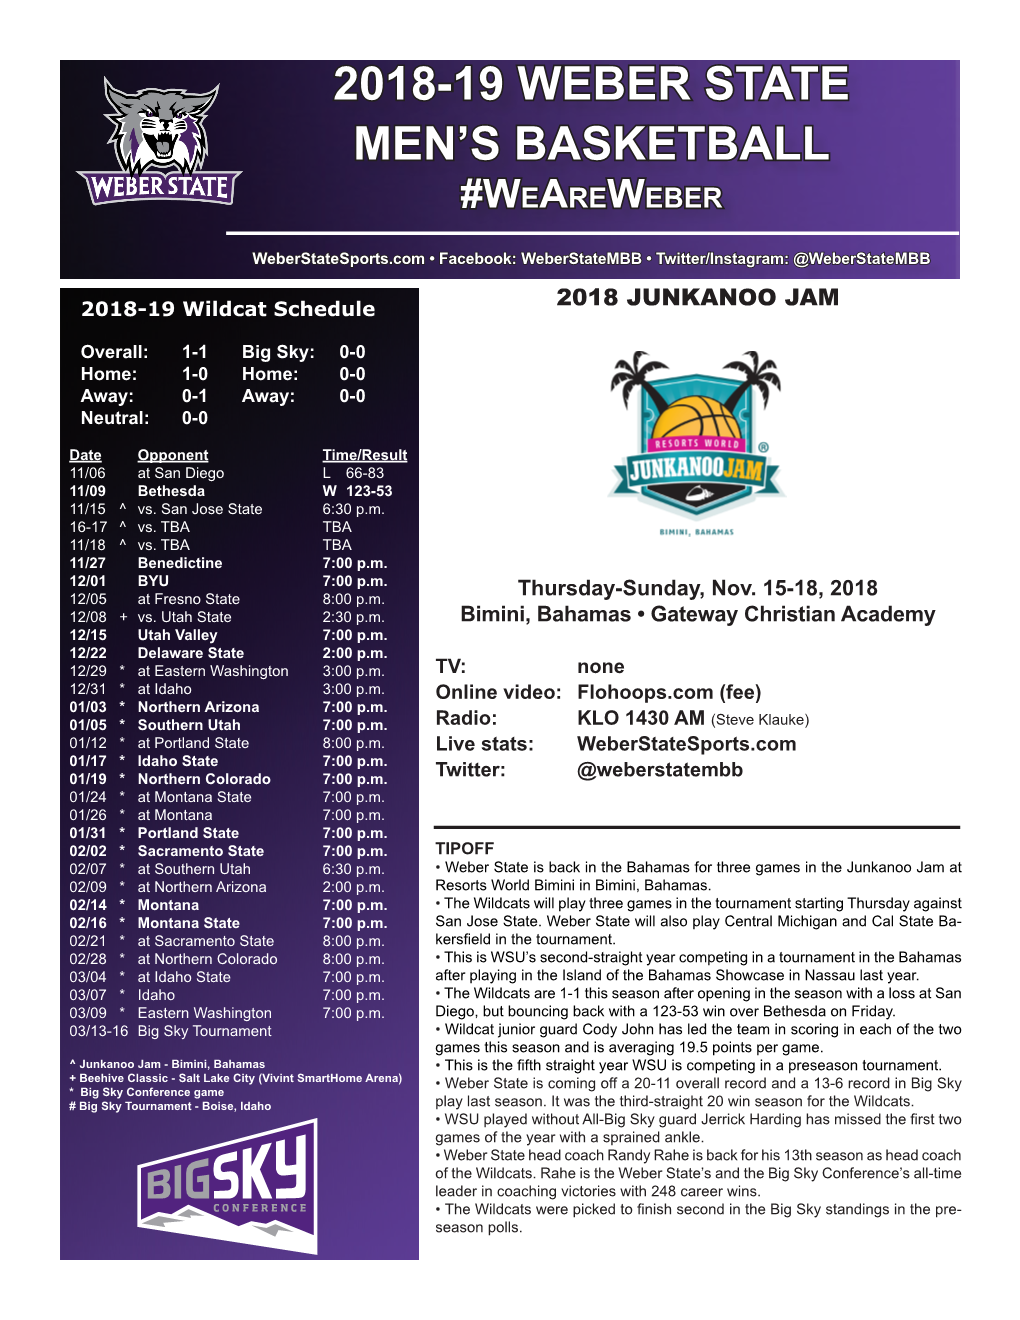 2018-19 Weber State Men's Basketball Weber State Combined Team Statistics (As of Nov 09, 2018) 2018-19 WEBER Stateall Games STATS and RESULTS